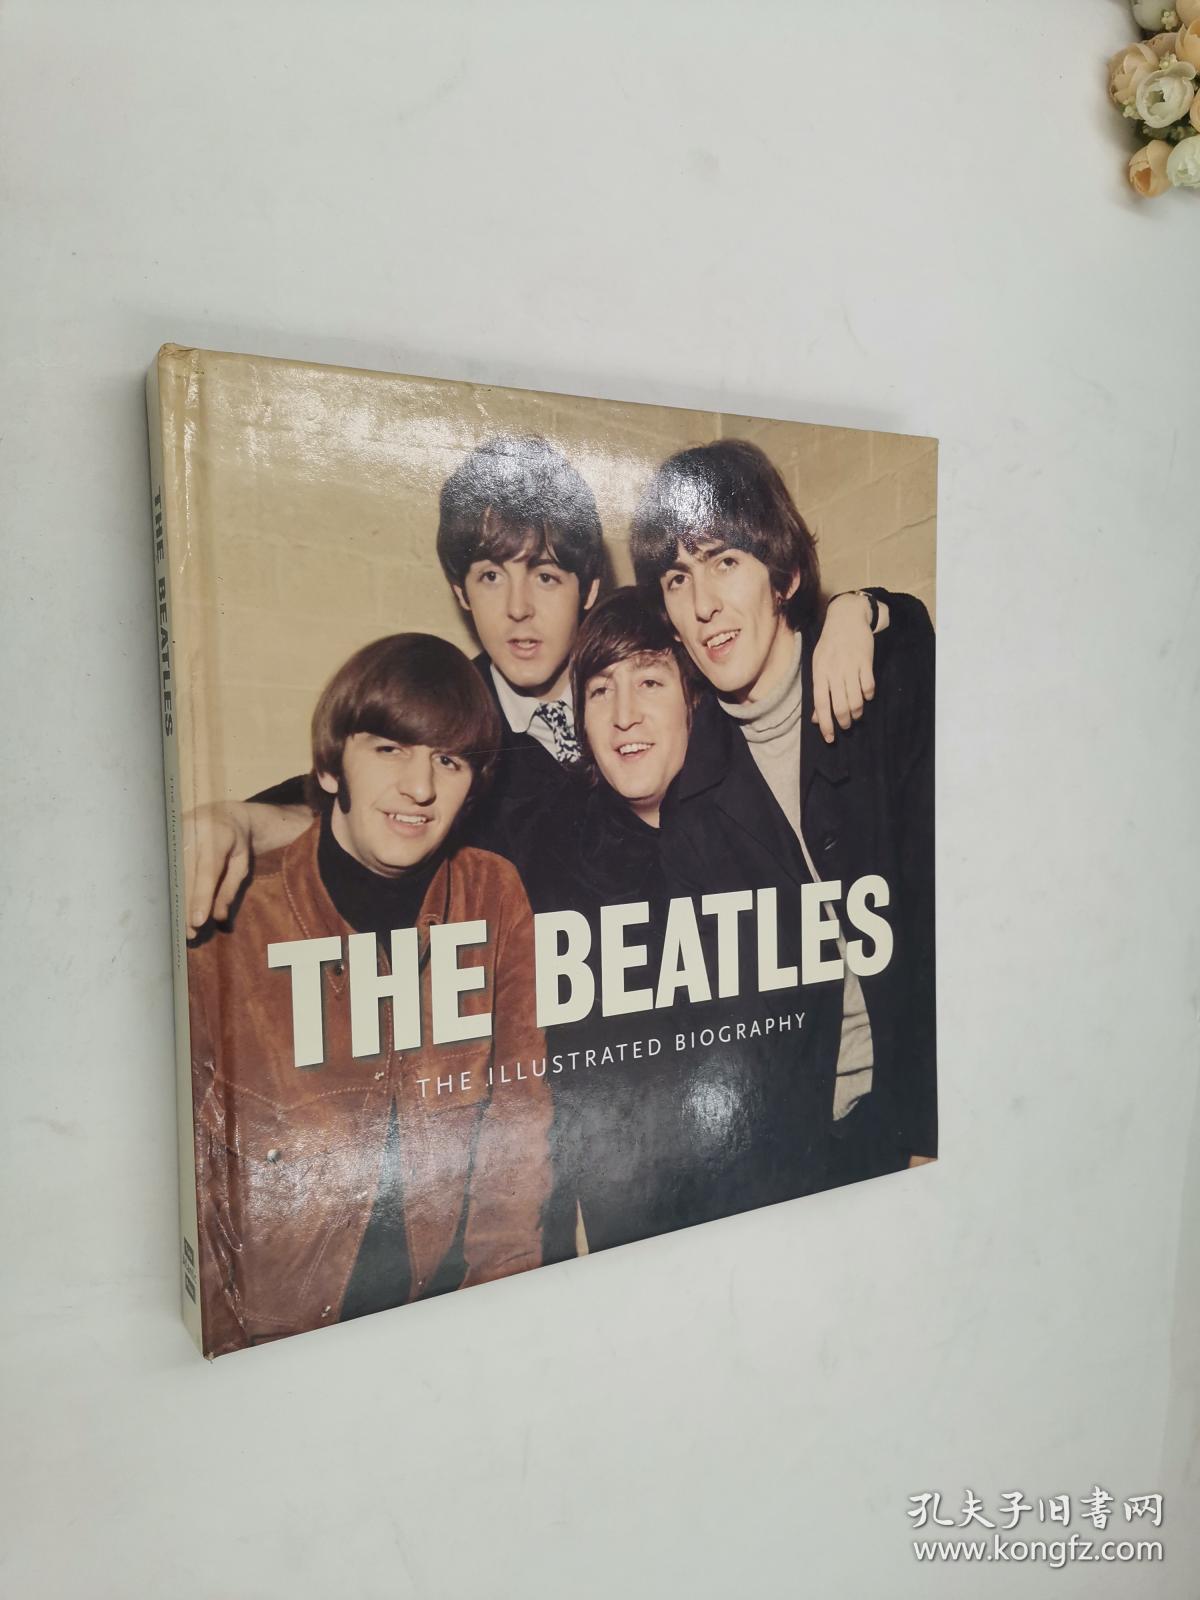 The "Beatles" Hardcover – January